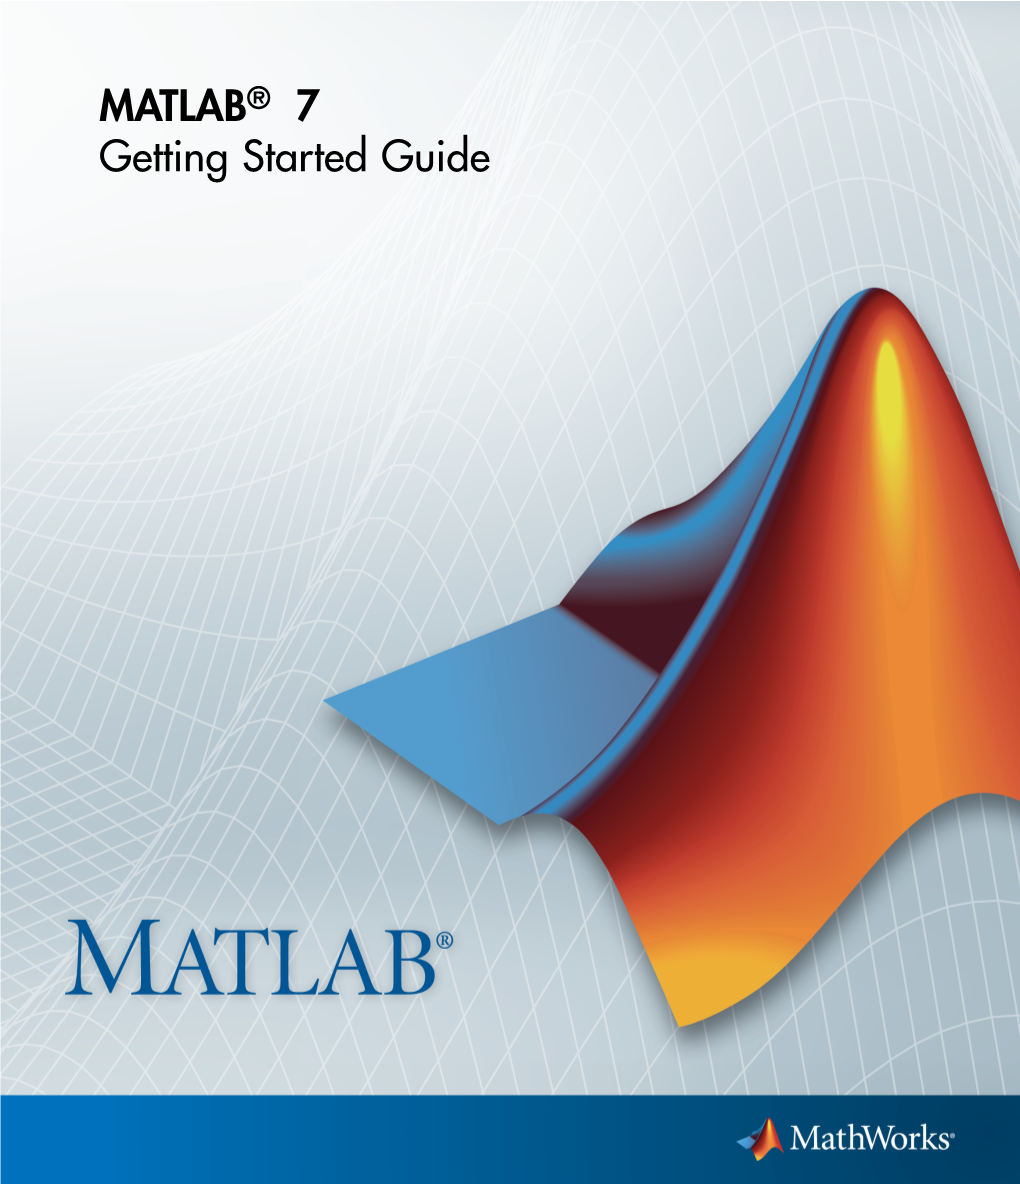 MATLAB® 7 Getting Started Guide